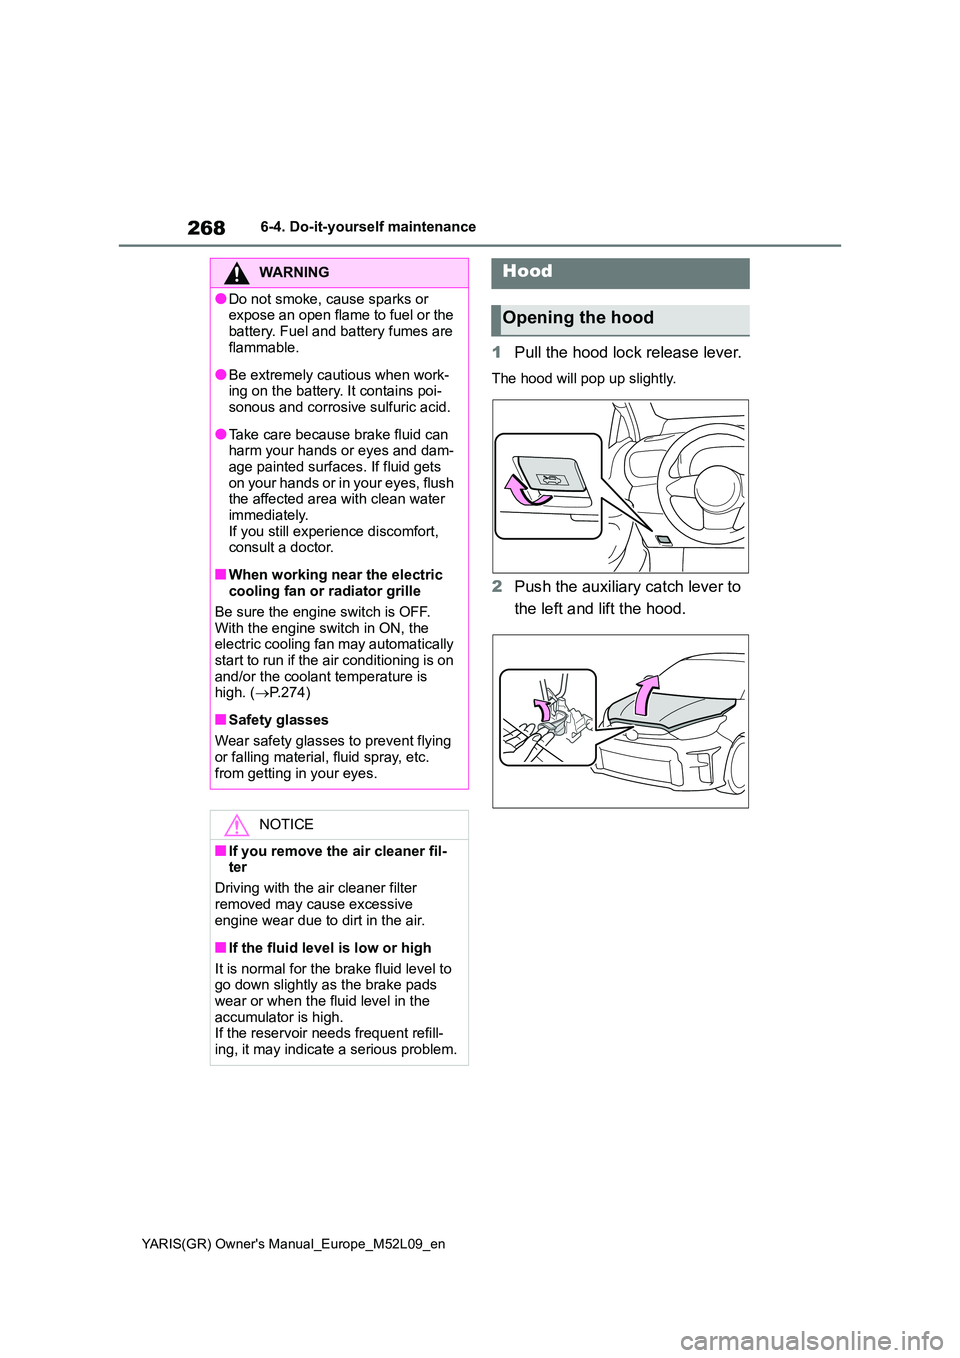 TOYOTA GR YARIS 2020  Owners Manual (in English) 268
YARIS(GR) Owners Manual_Europe_M52L09_en
6-4. Do-it-yourself maintenance
1Pull the hood lock release lever.
The hood will pop up slightly.
2Push the auxiliary catch lever to  
the left and lift t